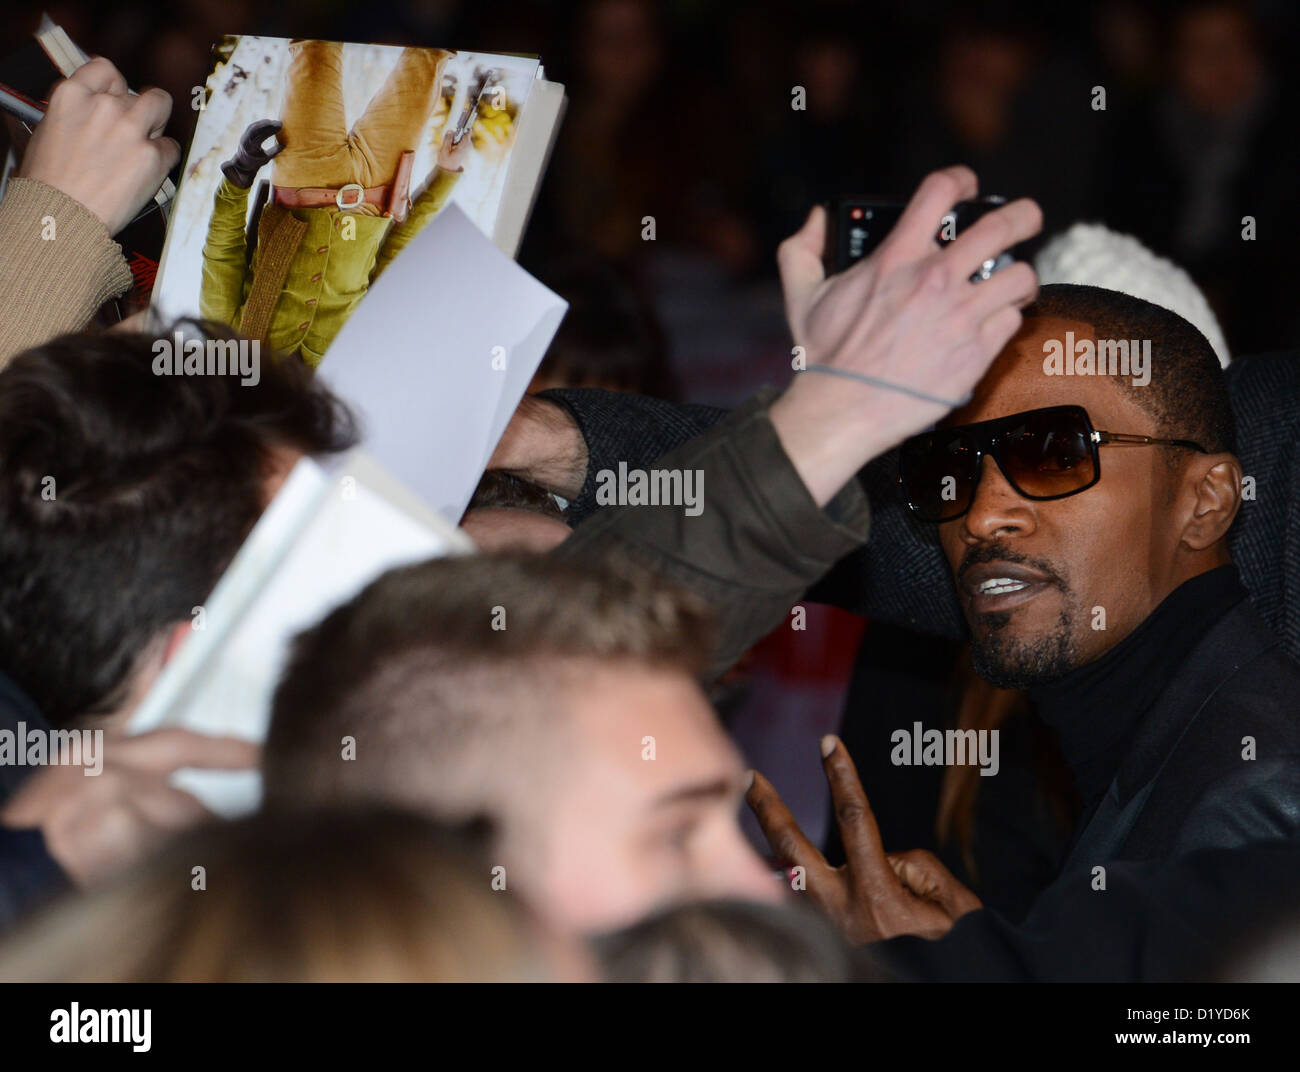 US actor Jamie Foxx (R) arrives for the premiere of 'Django Unchained' at Cinestar cinemas in Berlin, Germany, 08 January 2013. The film should be released in German cinemas on 17 January 2013. Photo: Jens Kalaene Stock Photo